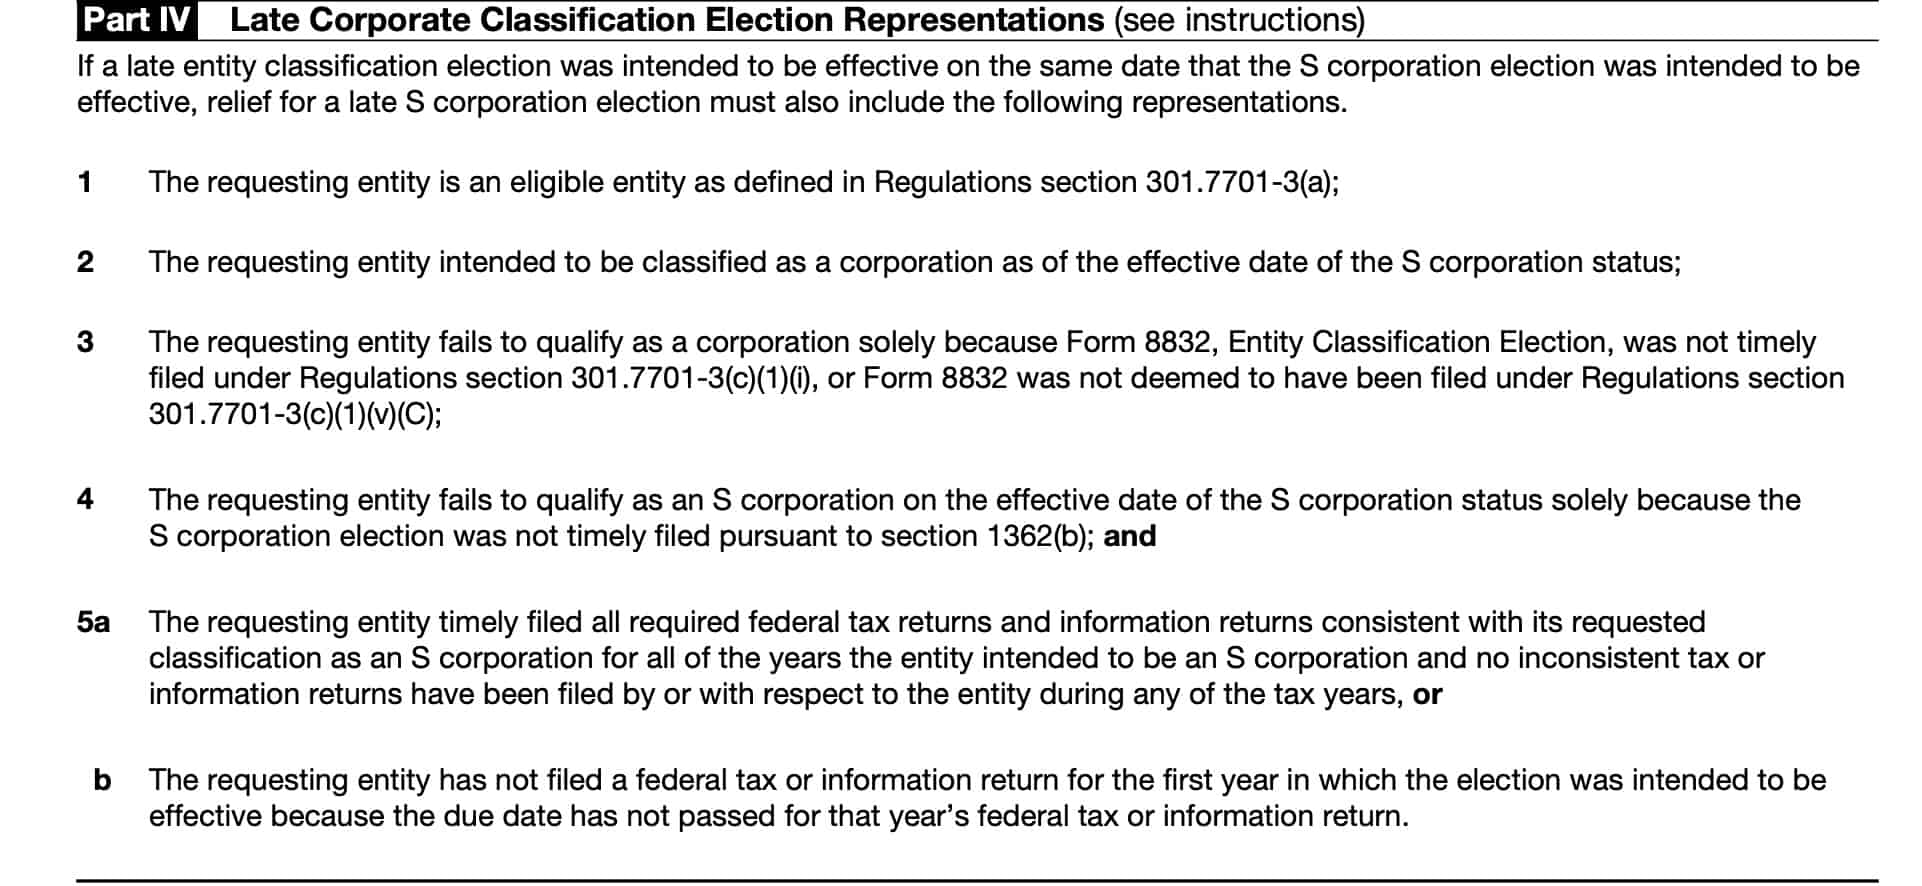 form 2553, part iv, late corporate classification election representations